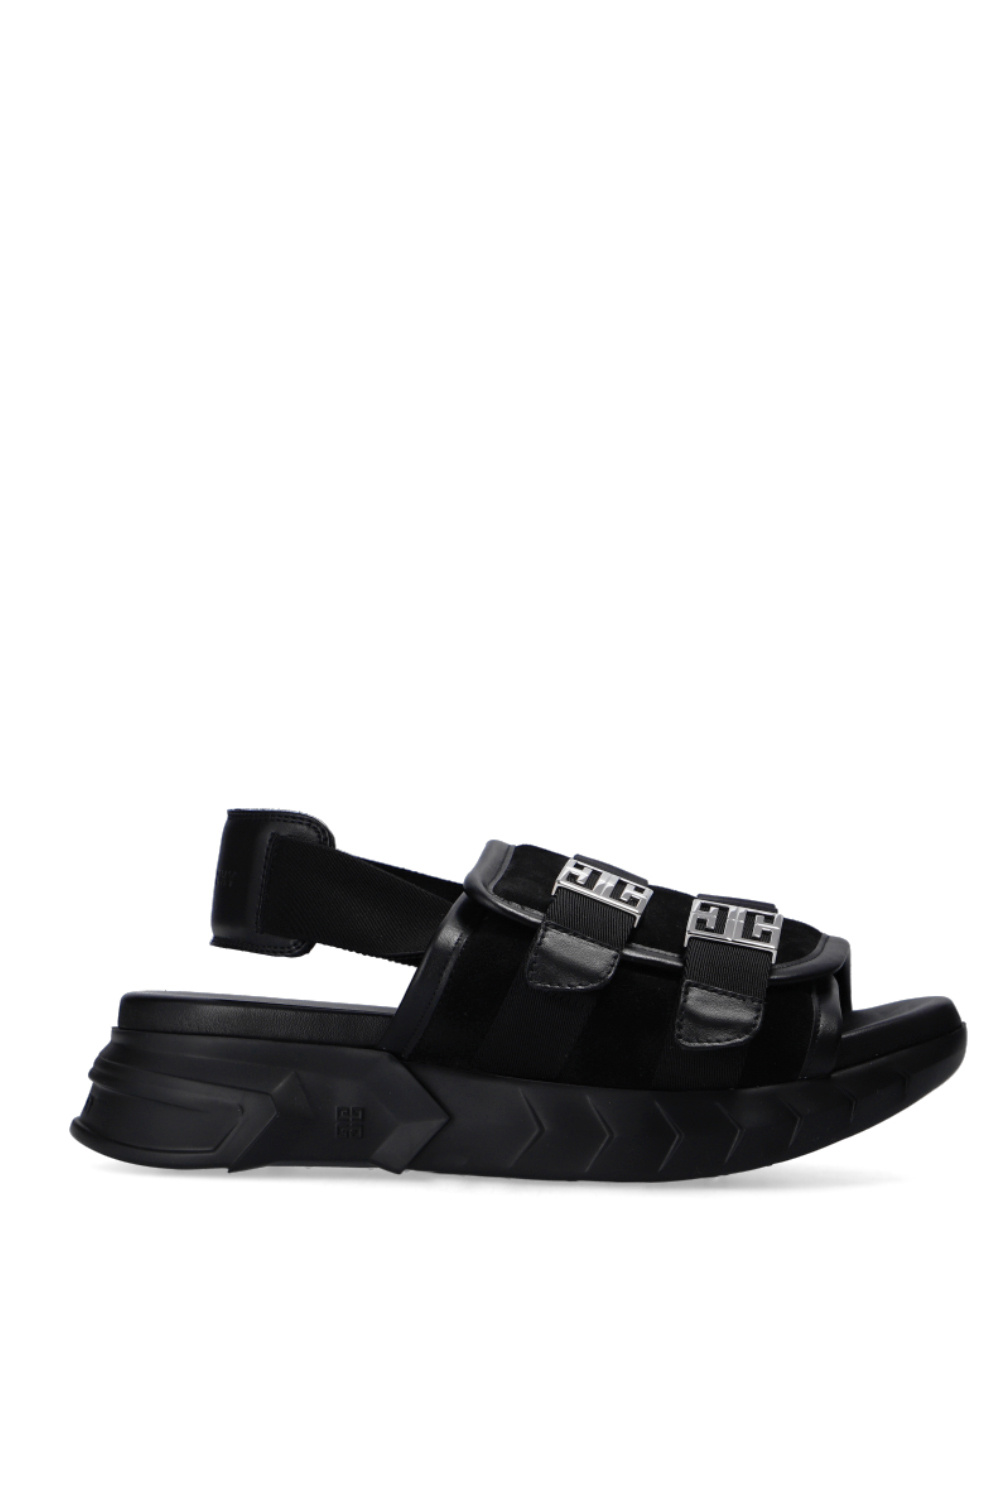 Givenchy ‘Marshmallow’ sandals